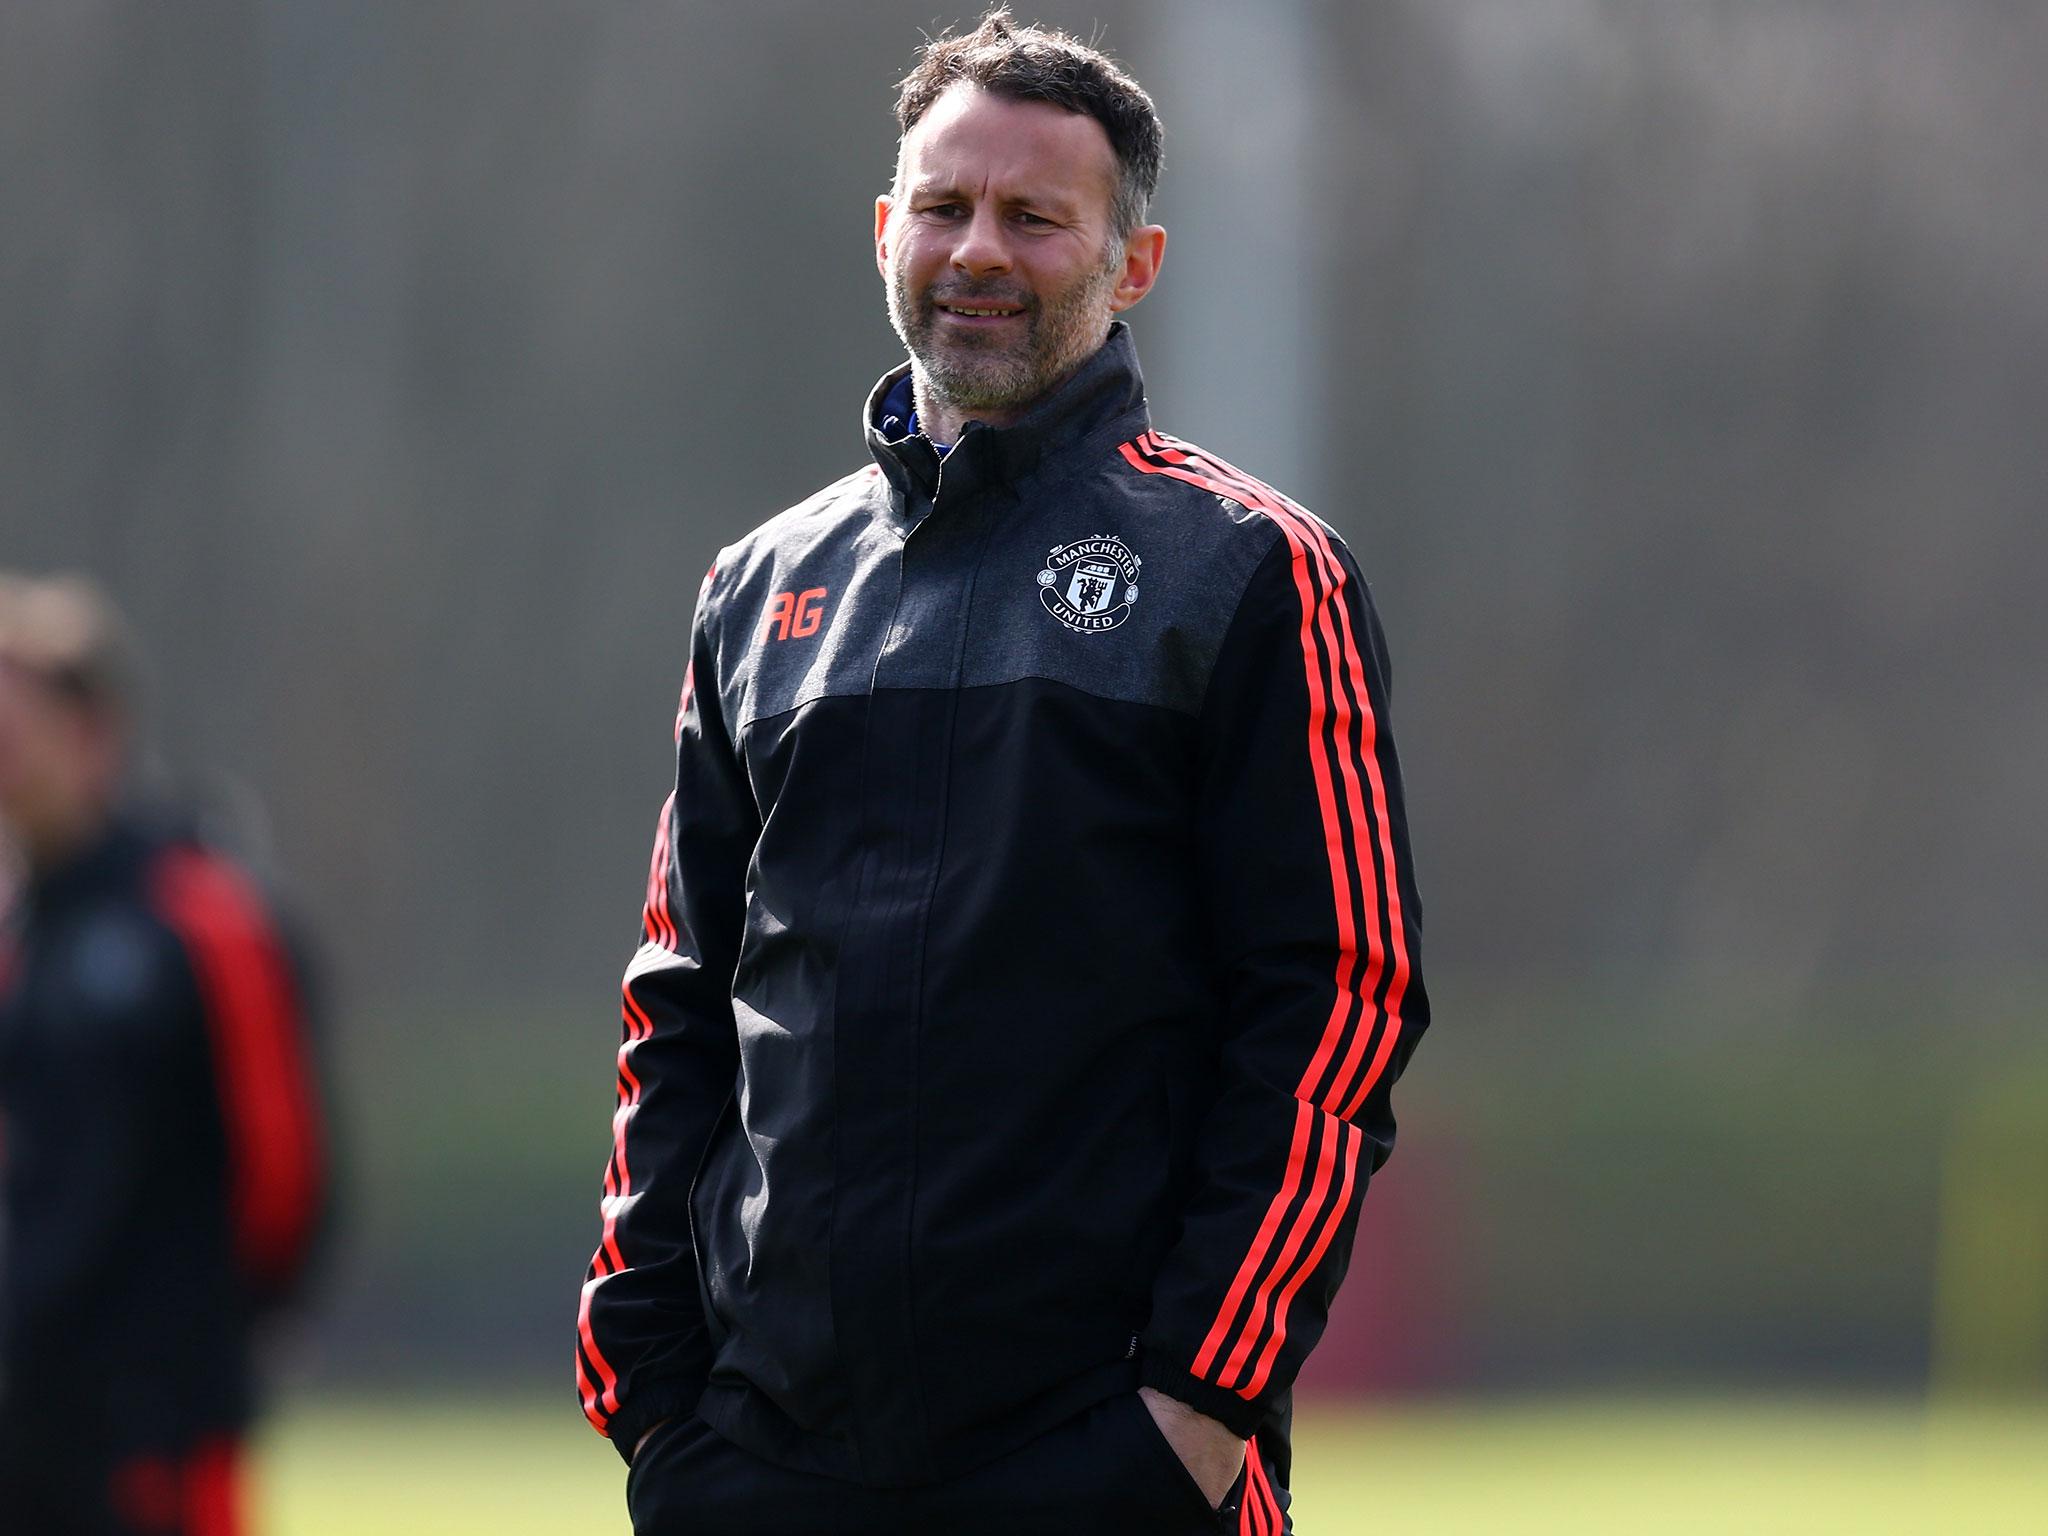 Giggs spoke exclusively to The Independent on his time at United